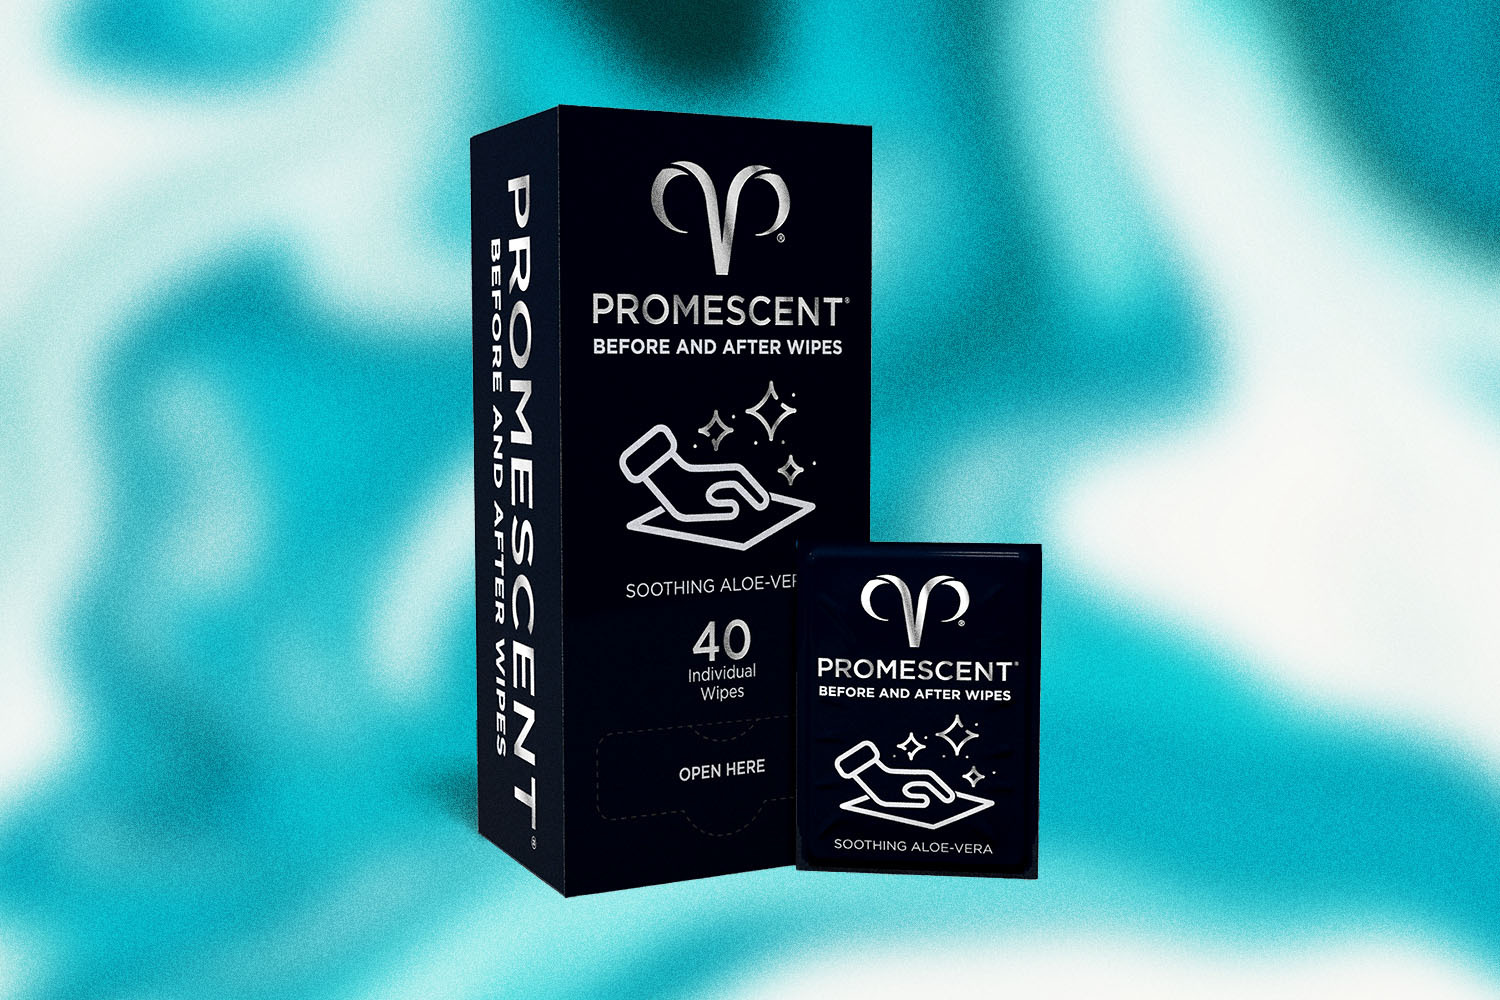 Image shows a box of Promescent's Before and After Wipes against a blue, watery background